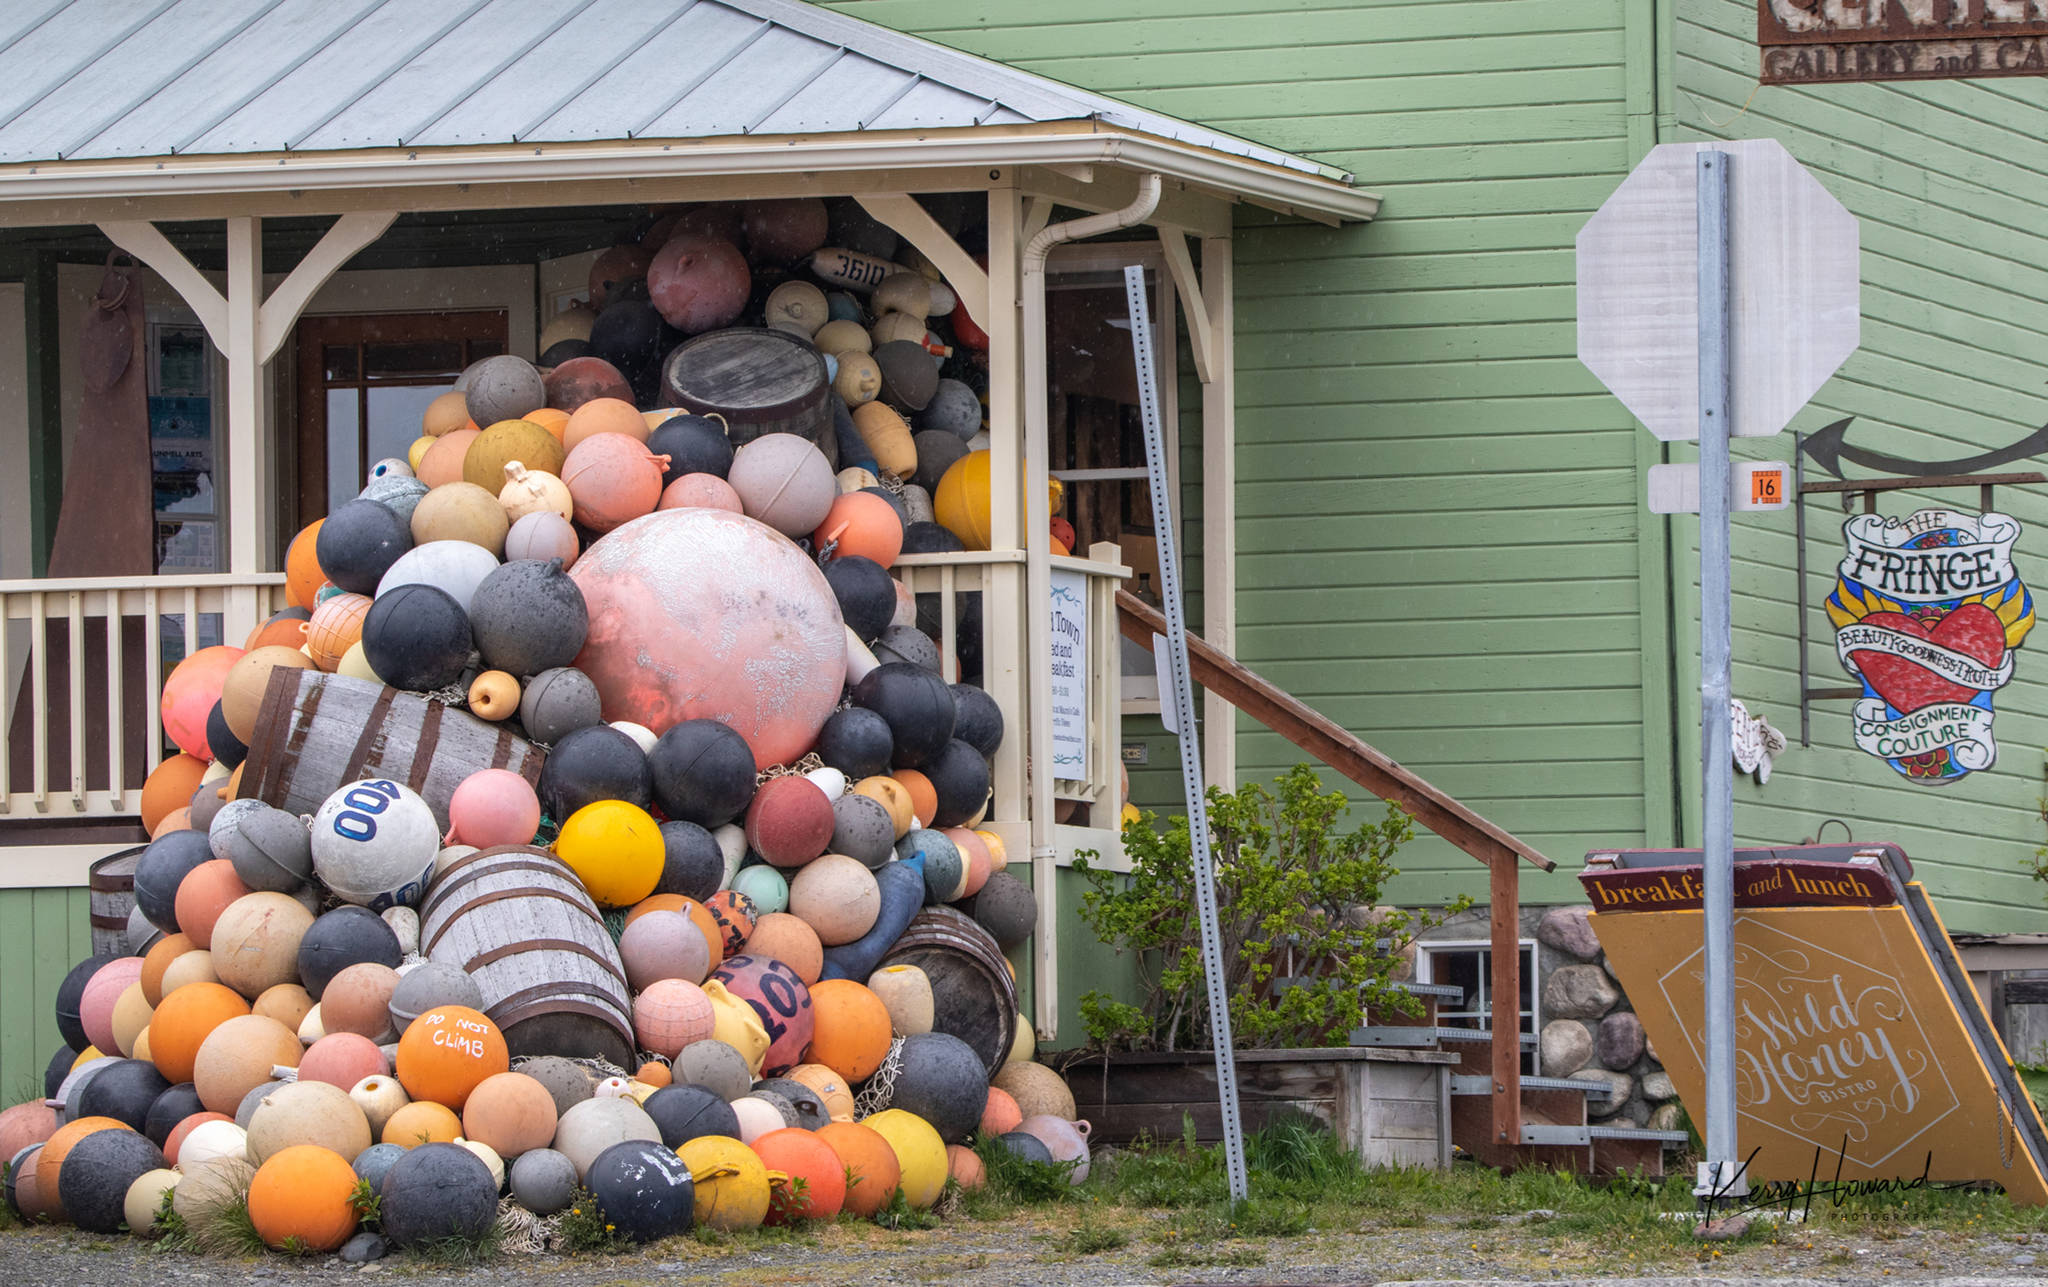 Dozens of buoys decorate the front porch of this building in Homer on May 10, 2019. (Courtesy Photo | Kerry Howard)